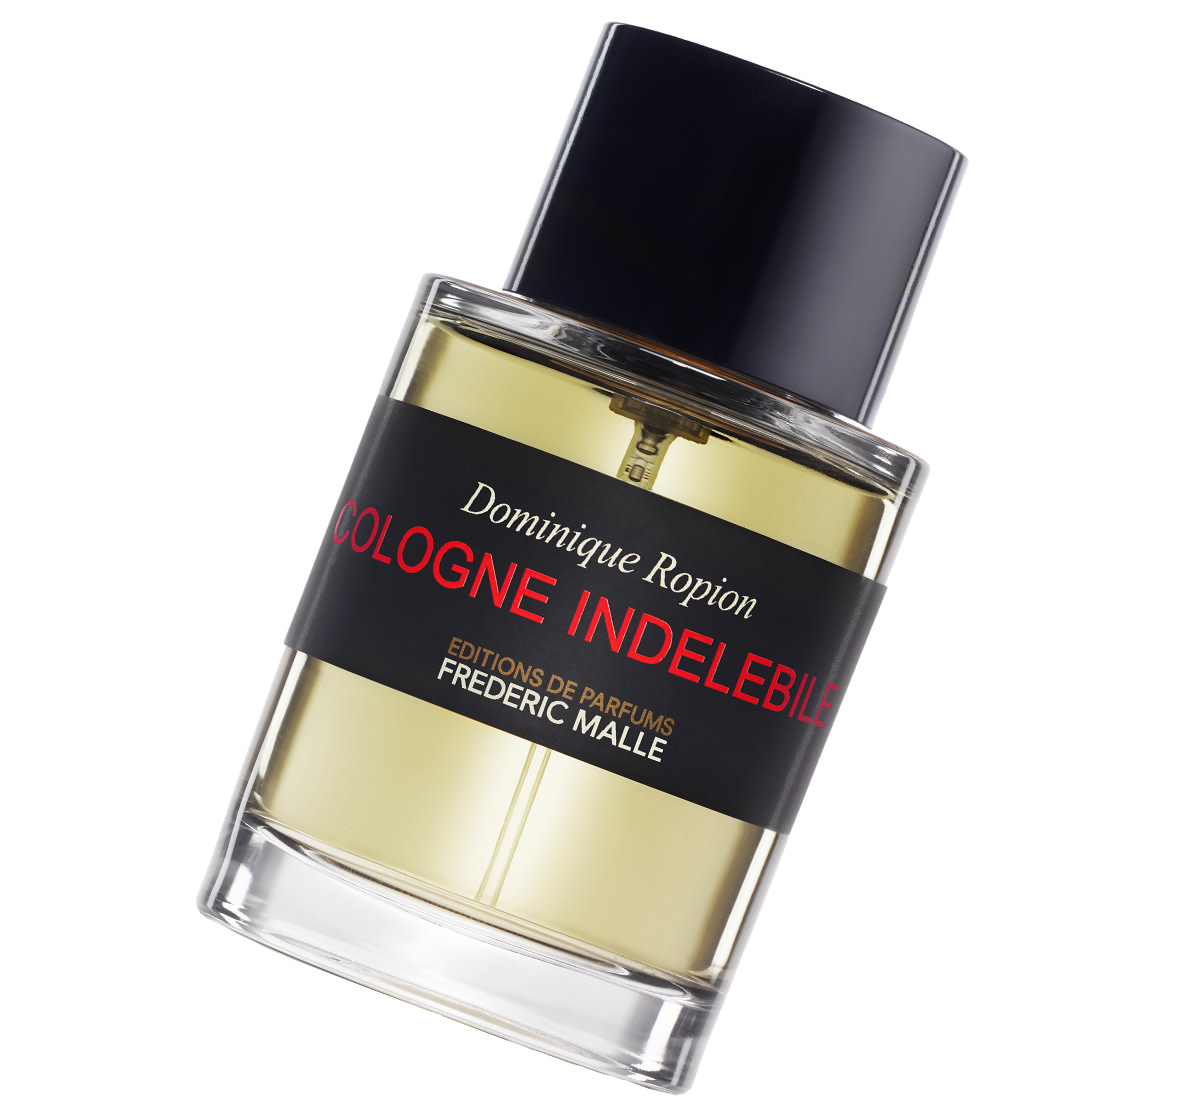 Spraycation: Cologne Indelebile by Frederic Malle